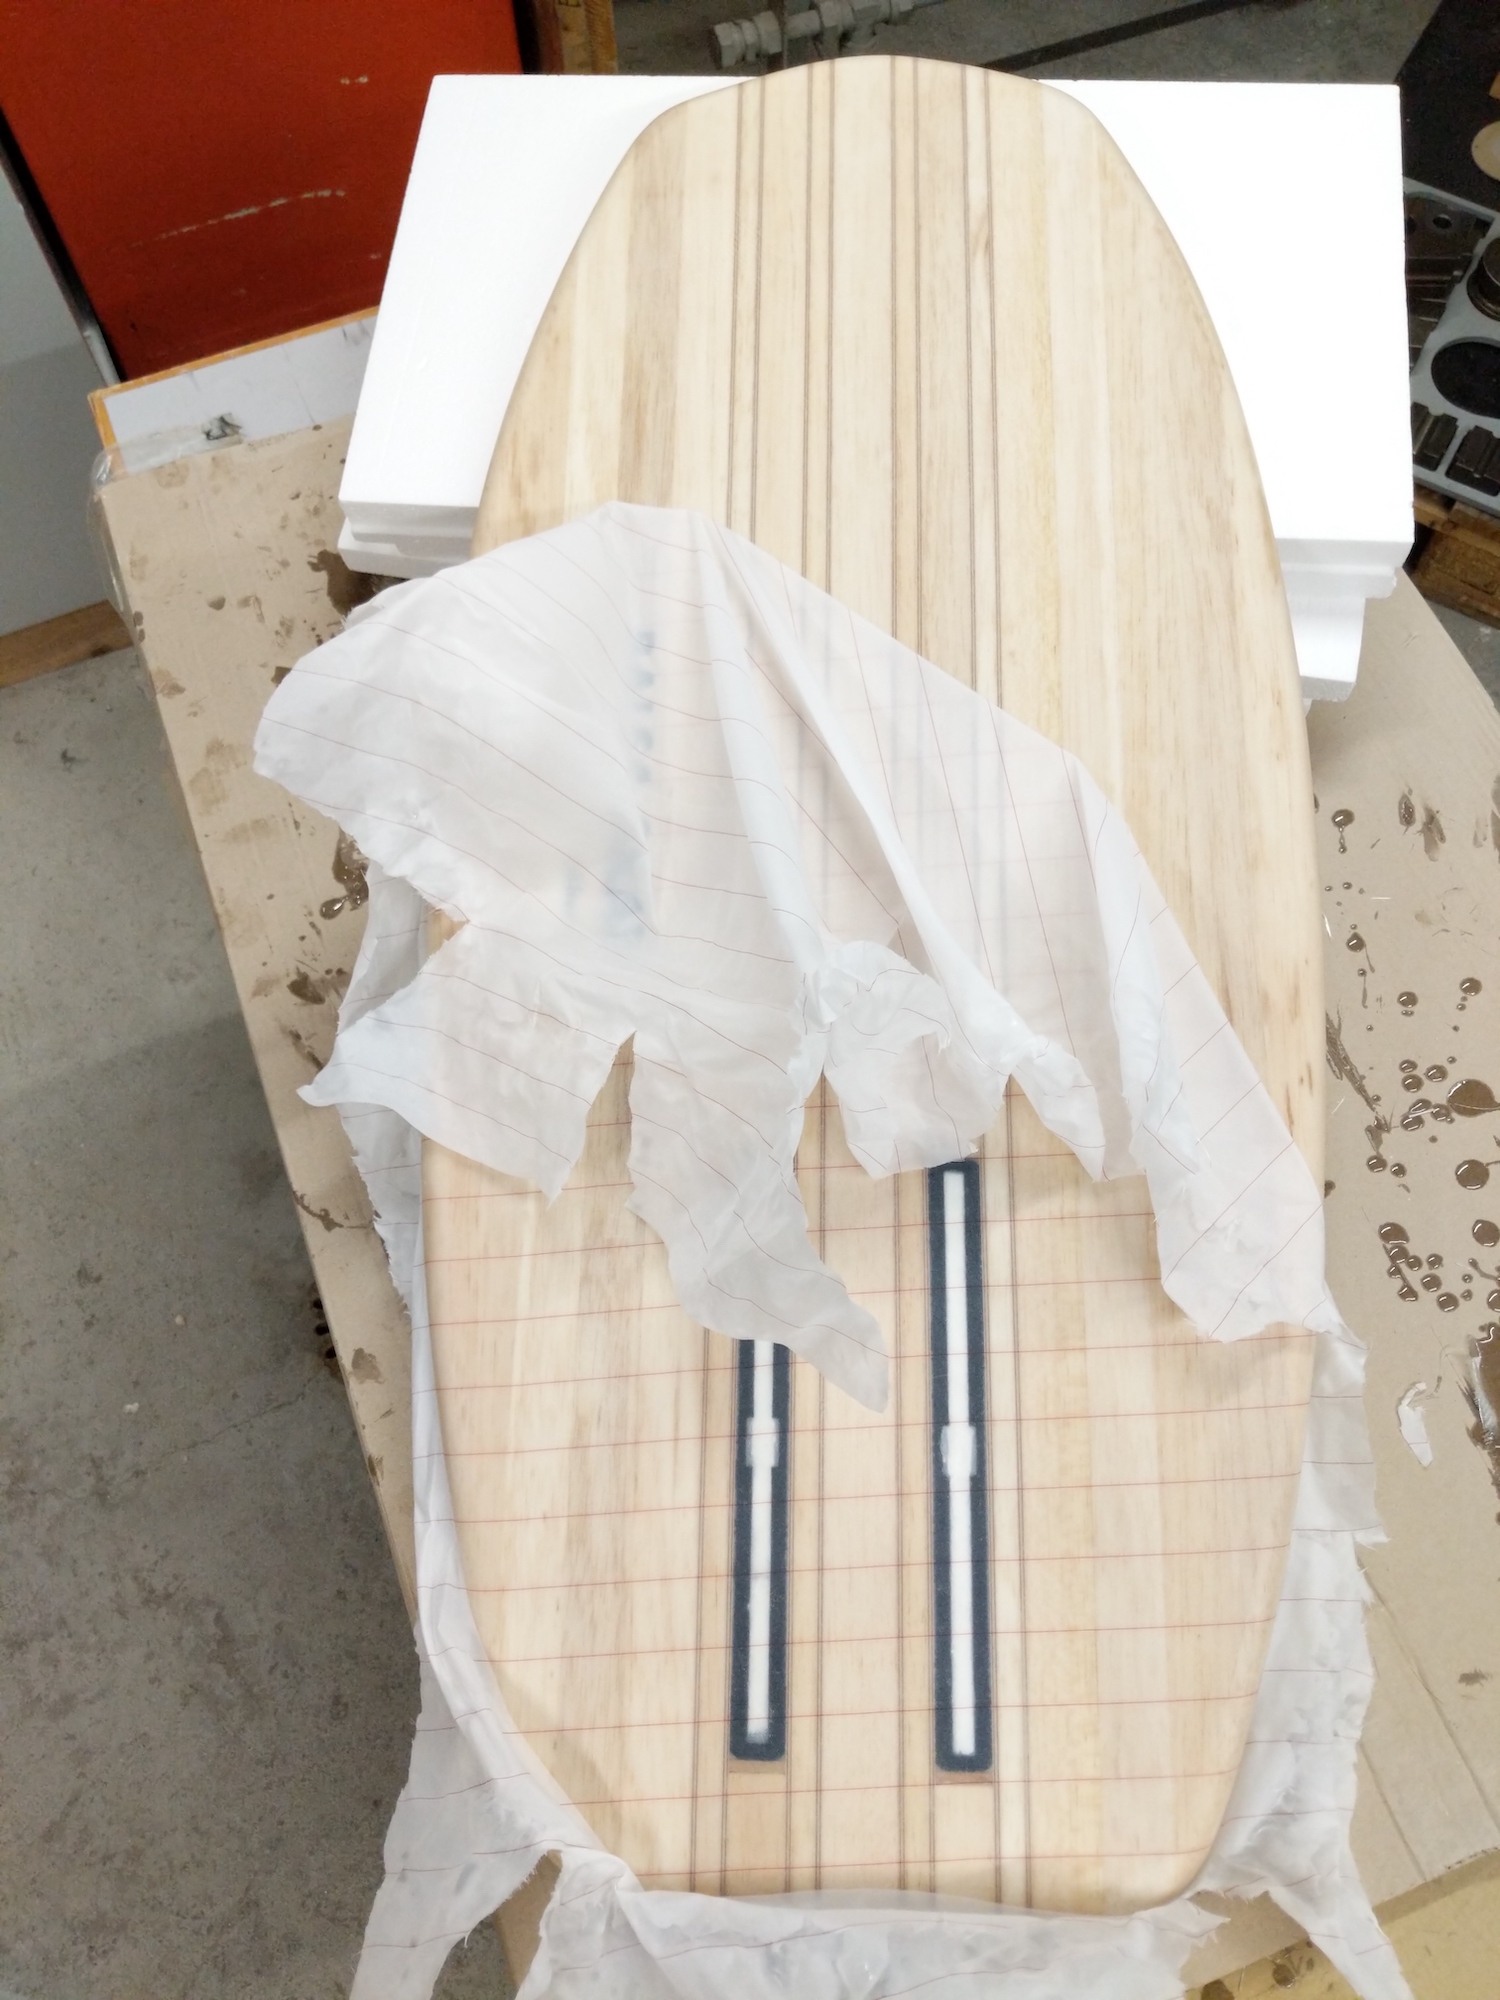 Removing the peel ply from the balsa surfboard